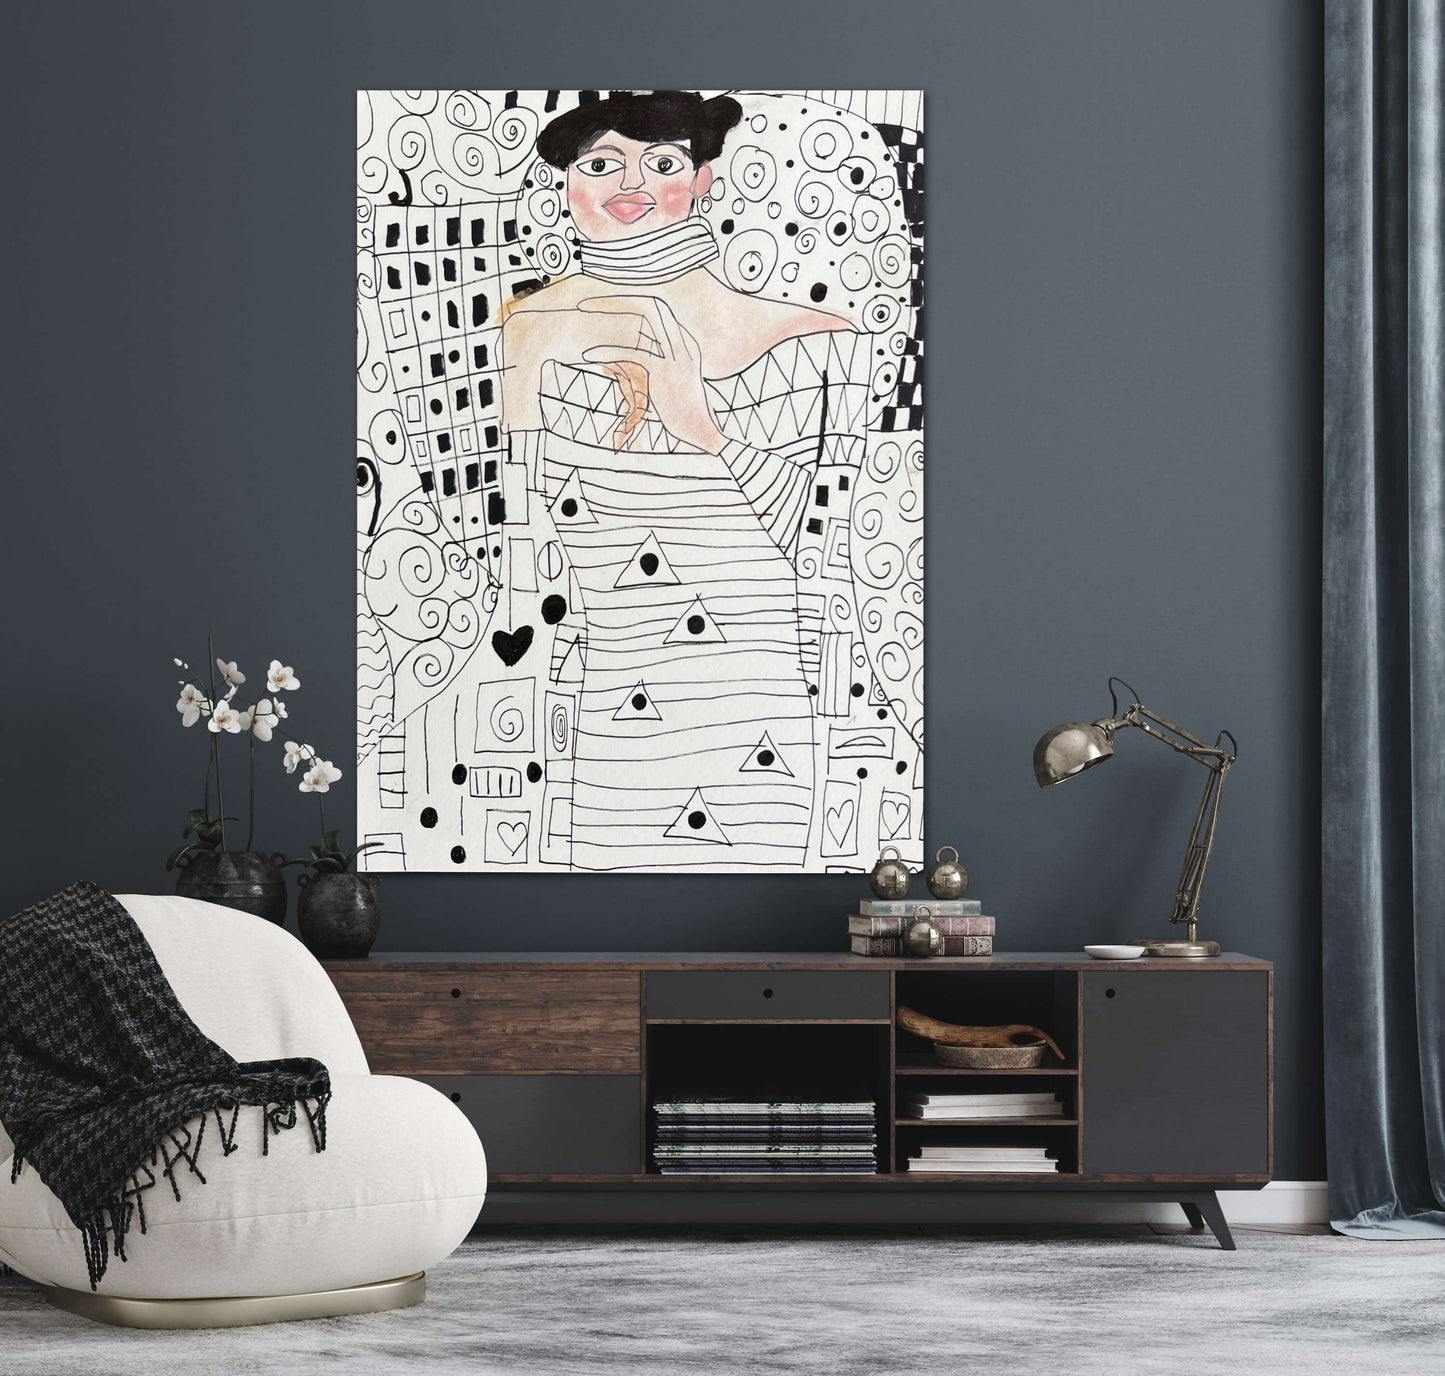 The Klimt Portrait by Viktor -  Print, Poster or Stretched Canvas Print in more sizes